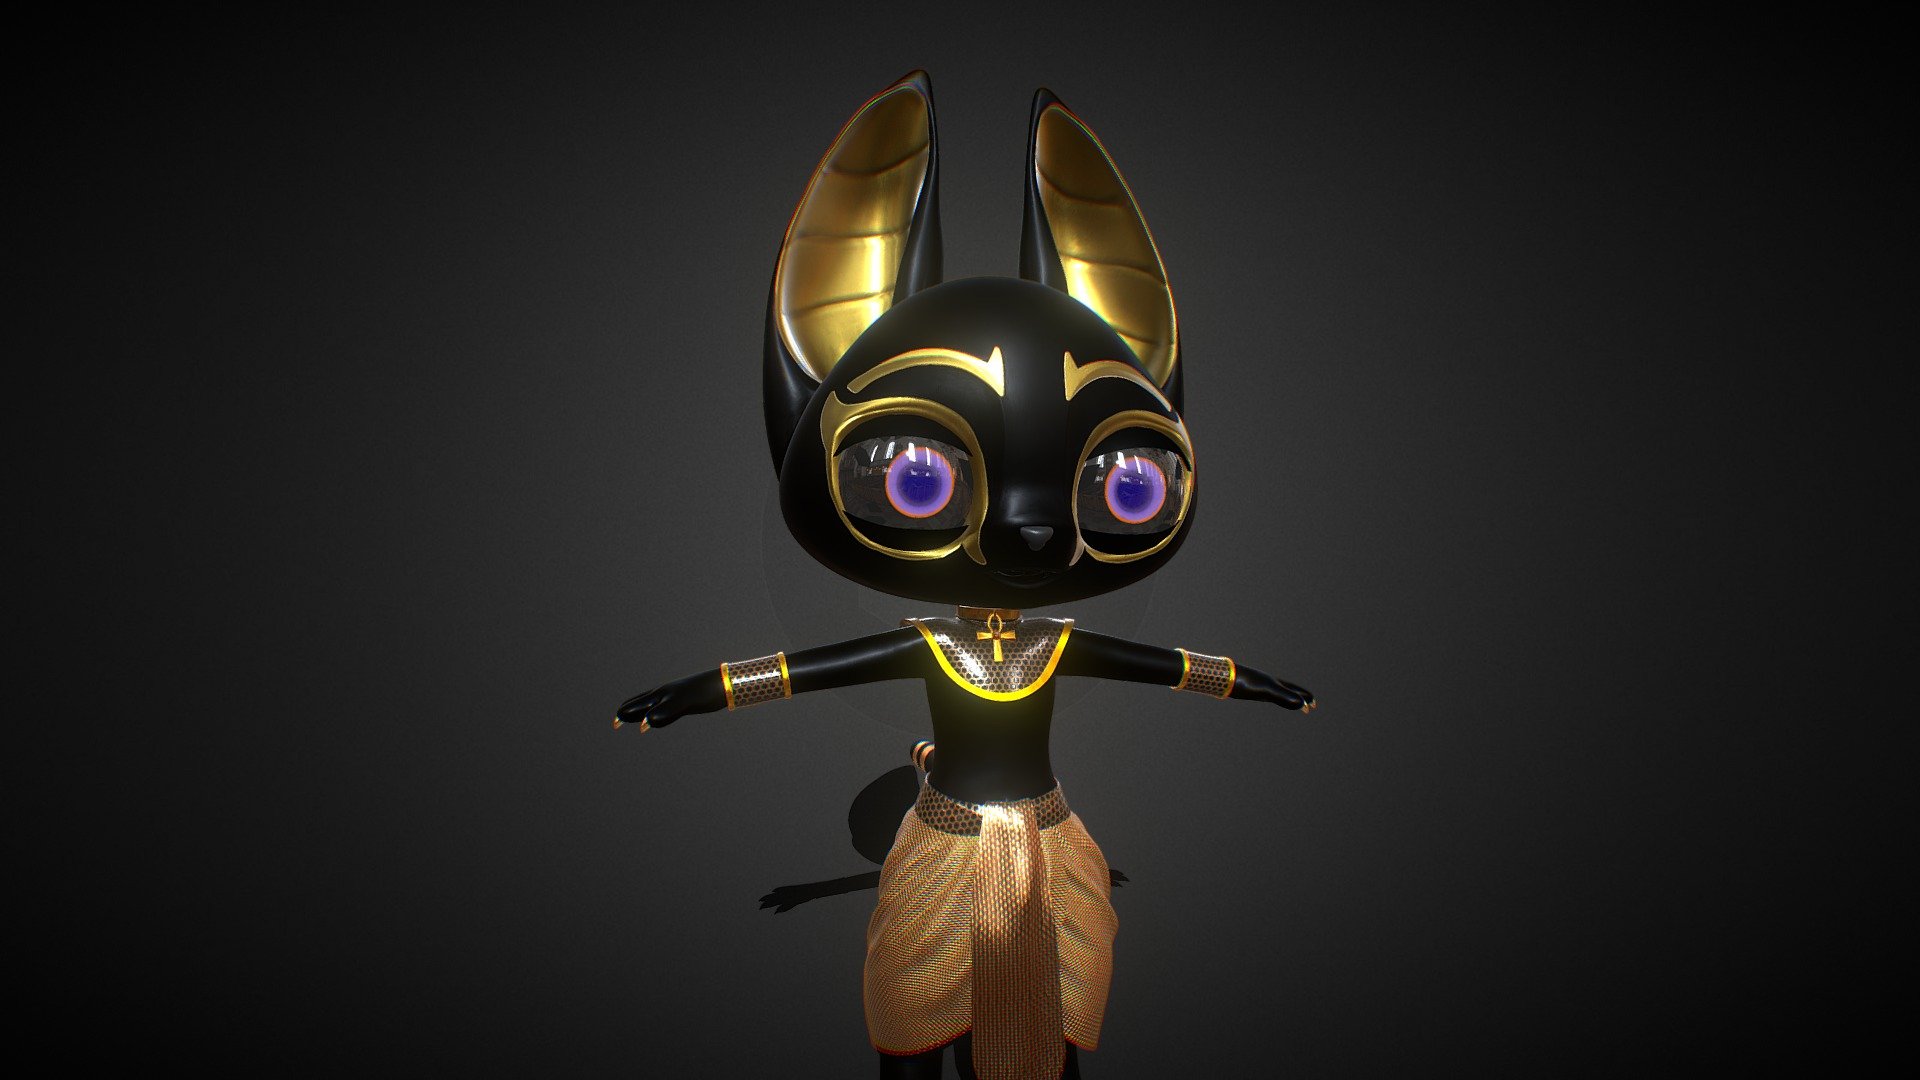 I looked at the Egyptian statues of cats, and wanted to make this cat 3d model